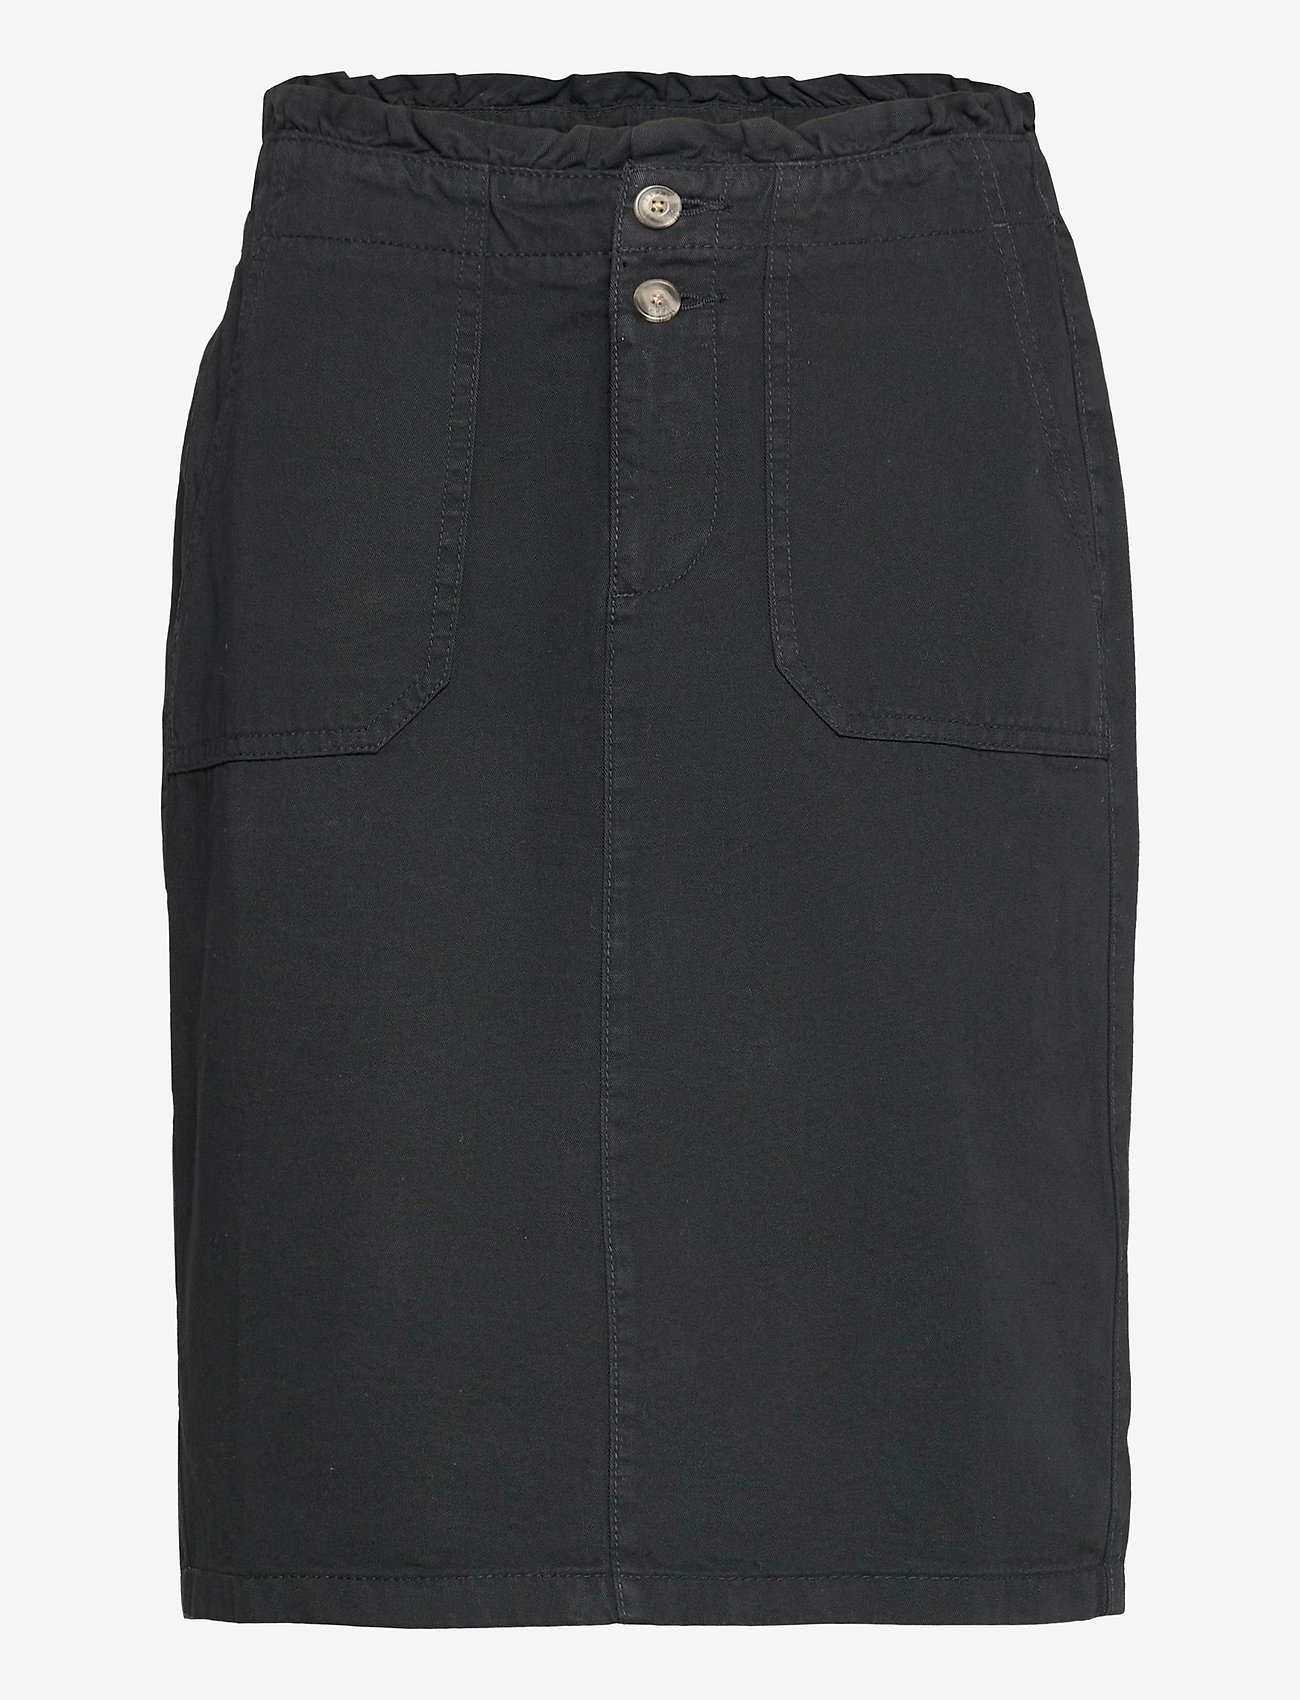 Esprit Casual - Utility skirt with a paperbag waistband - laveste priser - black - 0